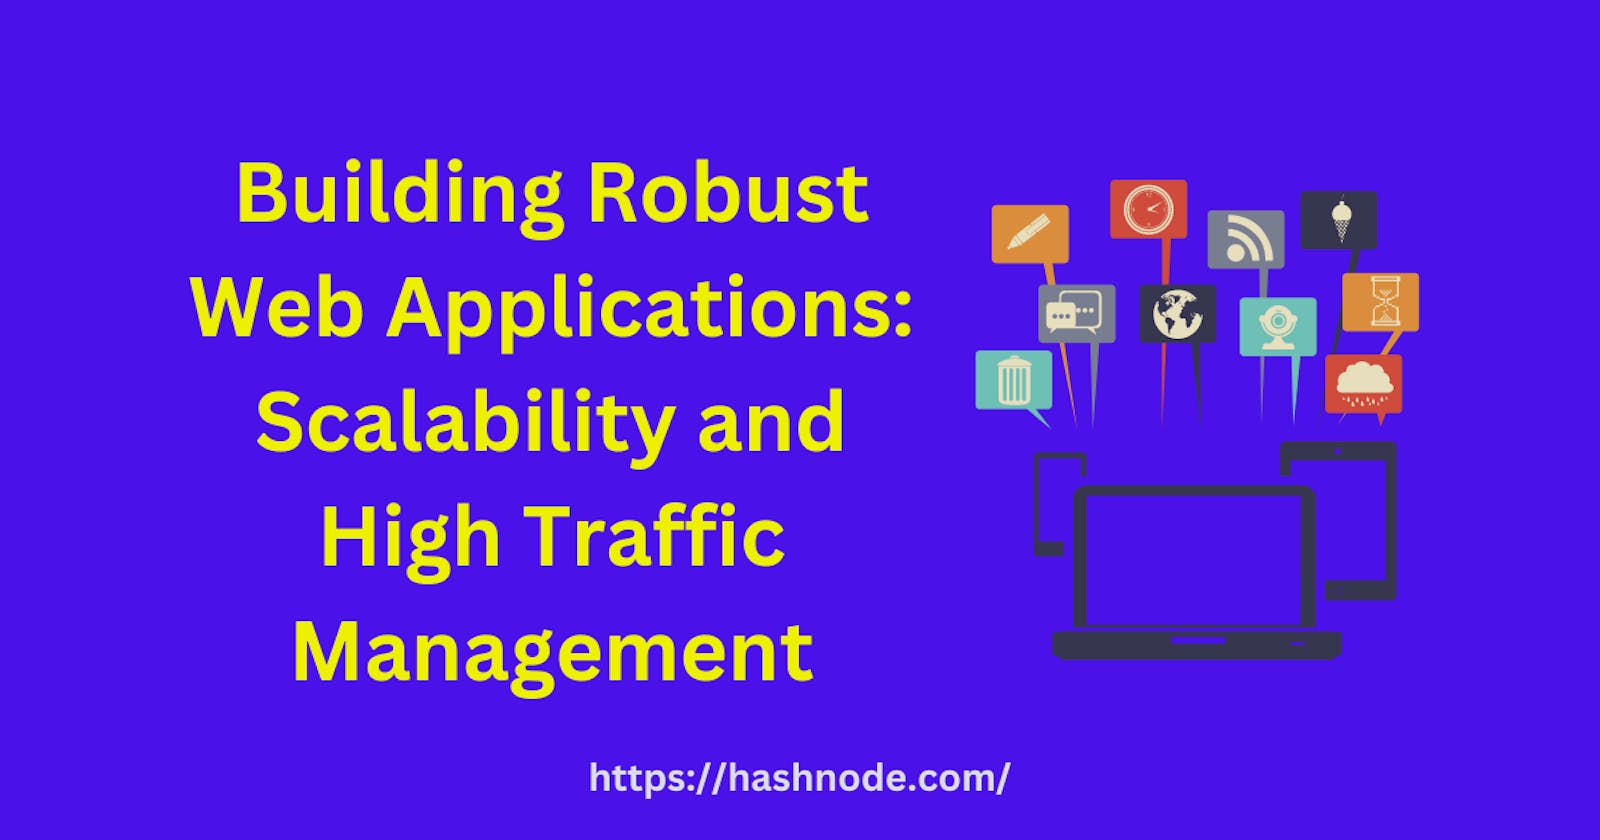 Building Robust Web Applications: Scalability and High Traffic Management